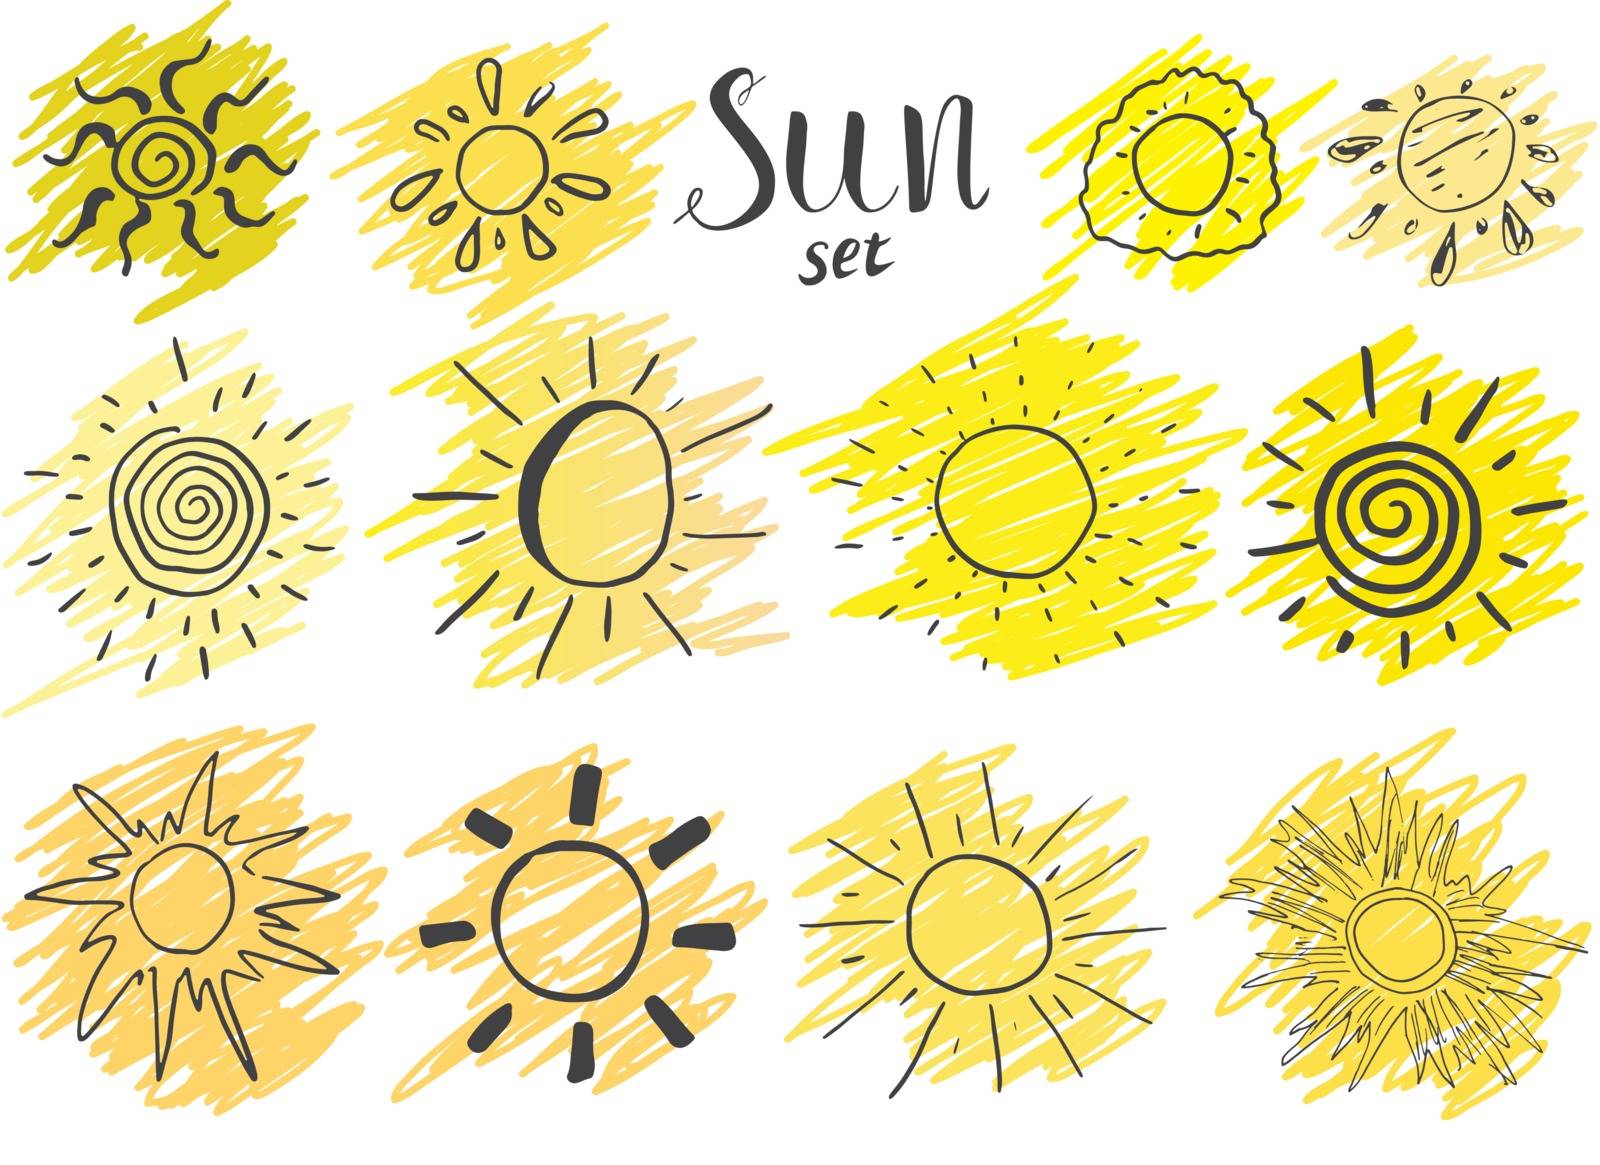 Hand drawn set of different suns, sketch vector illustration isolated on white by Lemon_workshop